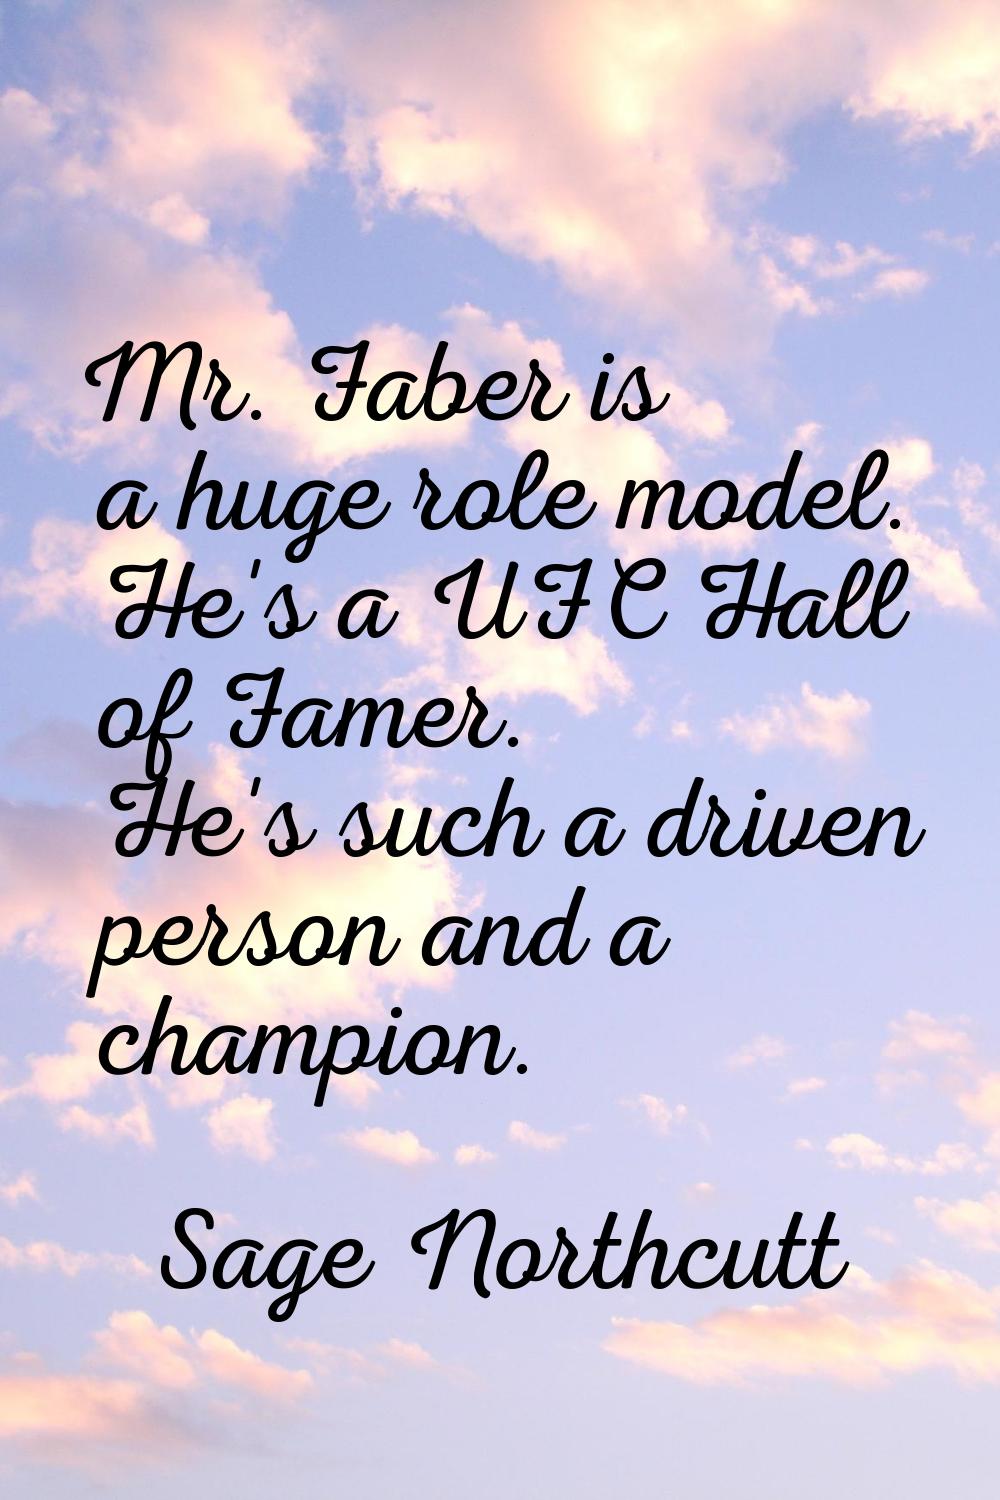 Mr. Faber is a huge role model. He's a UFC Hall of Famer. He's such a driven person and a champion.